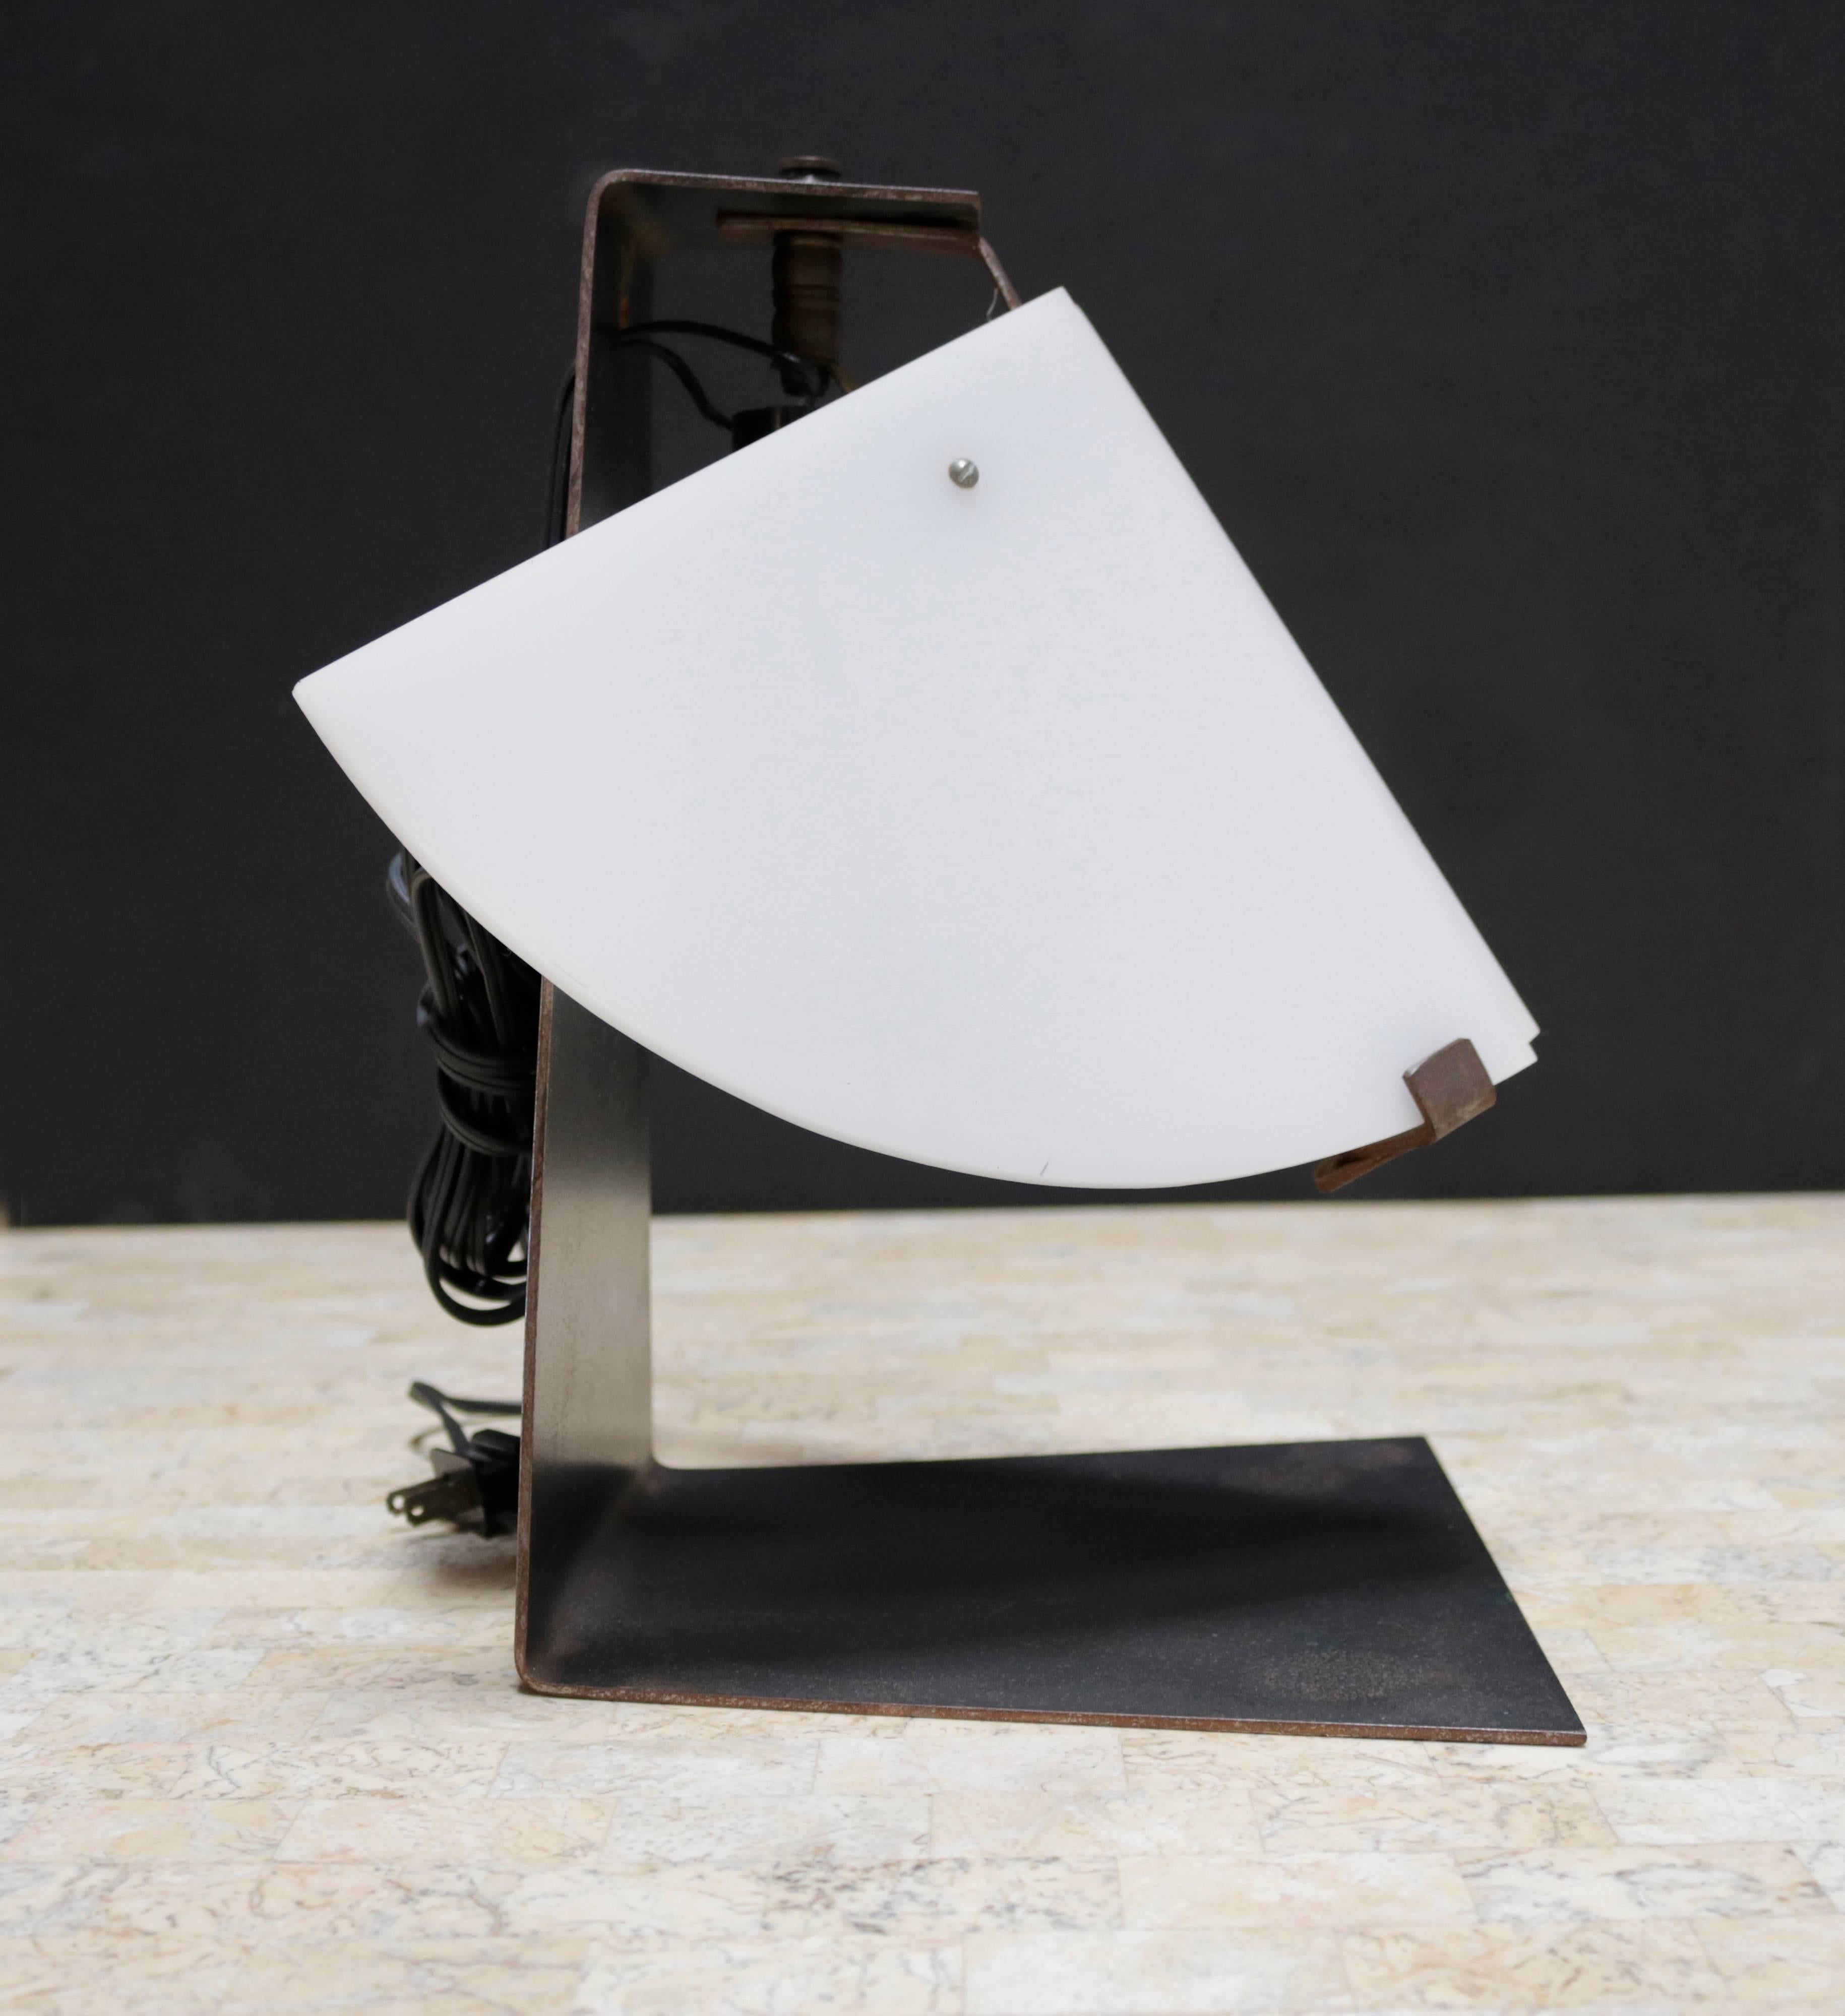 This cubist inspired piece was originally designed in 1922 by Pierre Chareau.

Made up of a base in forged blackened metal and darkened wrought iron with two panels of plexiglass in quarter-wedges, this adjustable lamp has probably been made by a